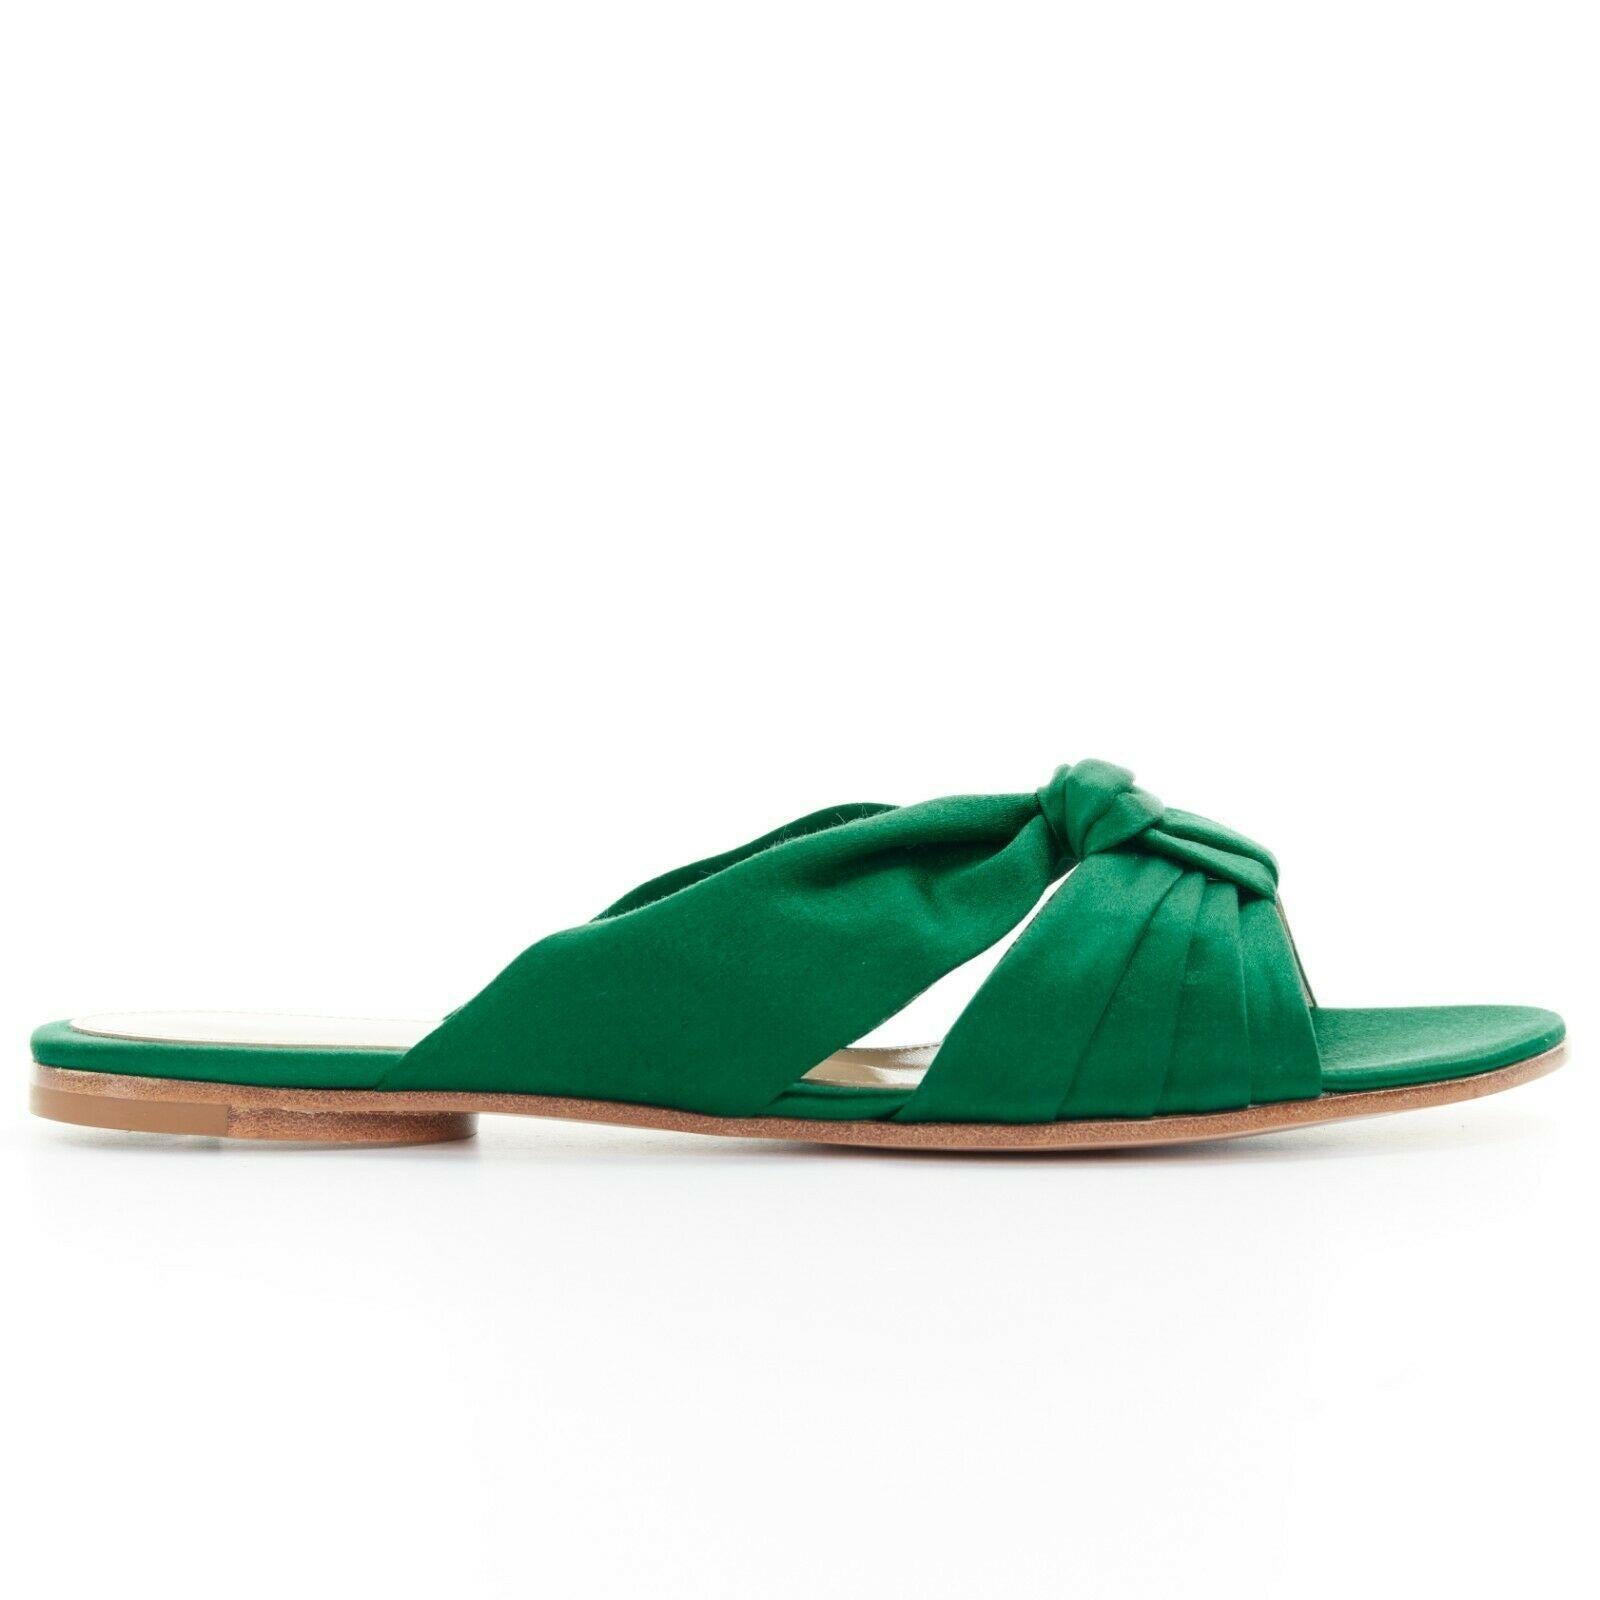 new GIANVITO ROSSI Blaire Flat emerald green stain knot open toe flat slide EU37

GIANVITO ROSSI
Blaire Flat. Emerald green satin. Pleated knotted strap. Open toe. Slip on slides. Made in Italy.

CONDITION
New with box.

SIZING
Designer size: